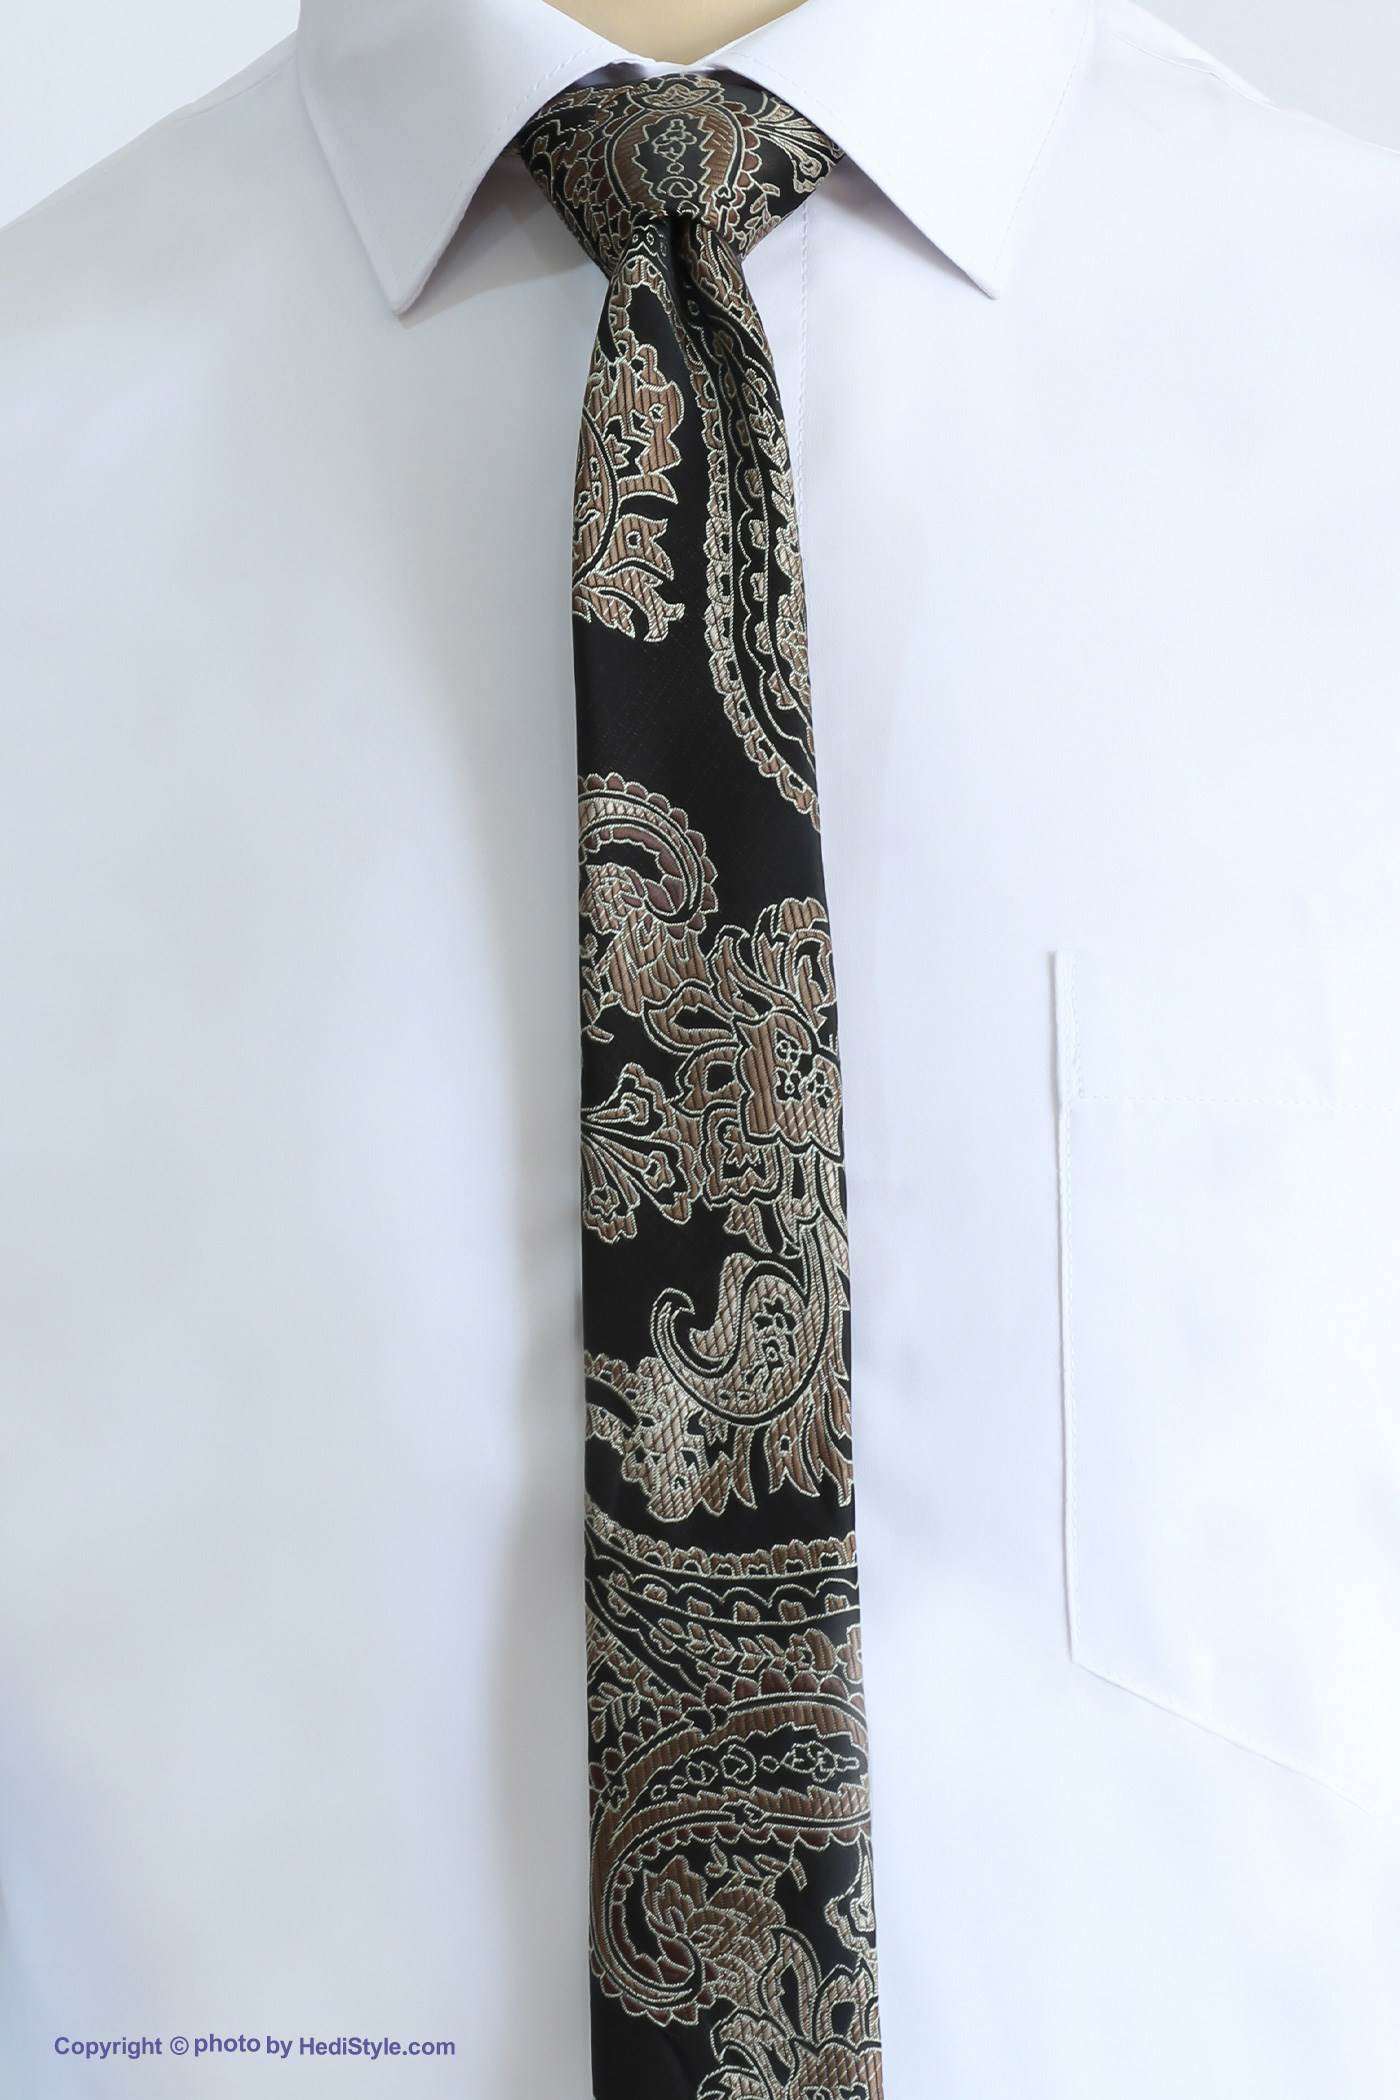 Tie and leather set of black and brown jacquard design code T01-07-0131